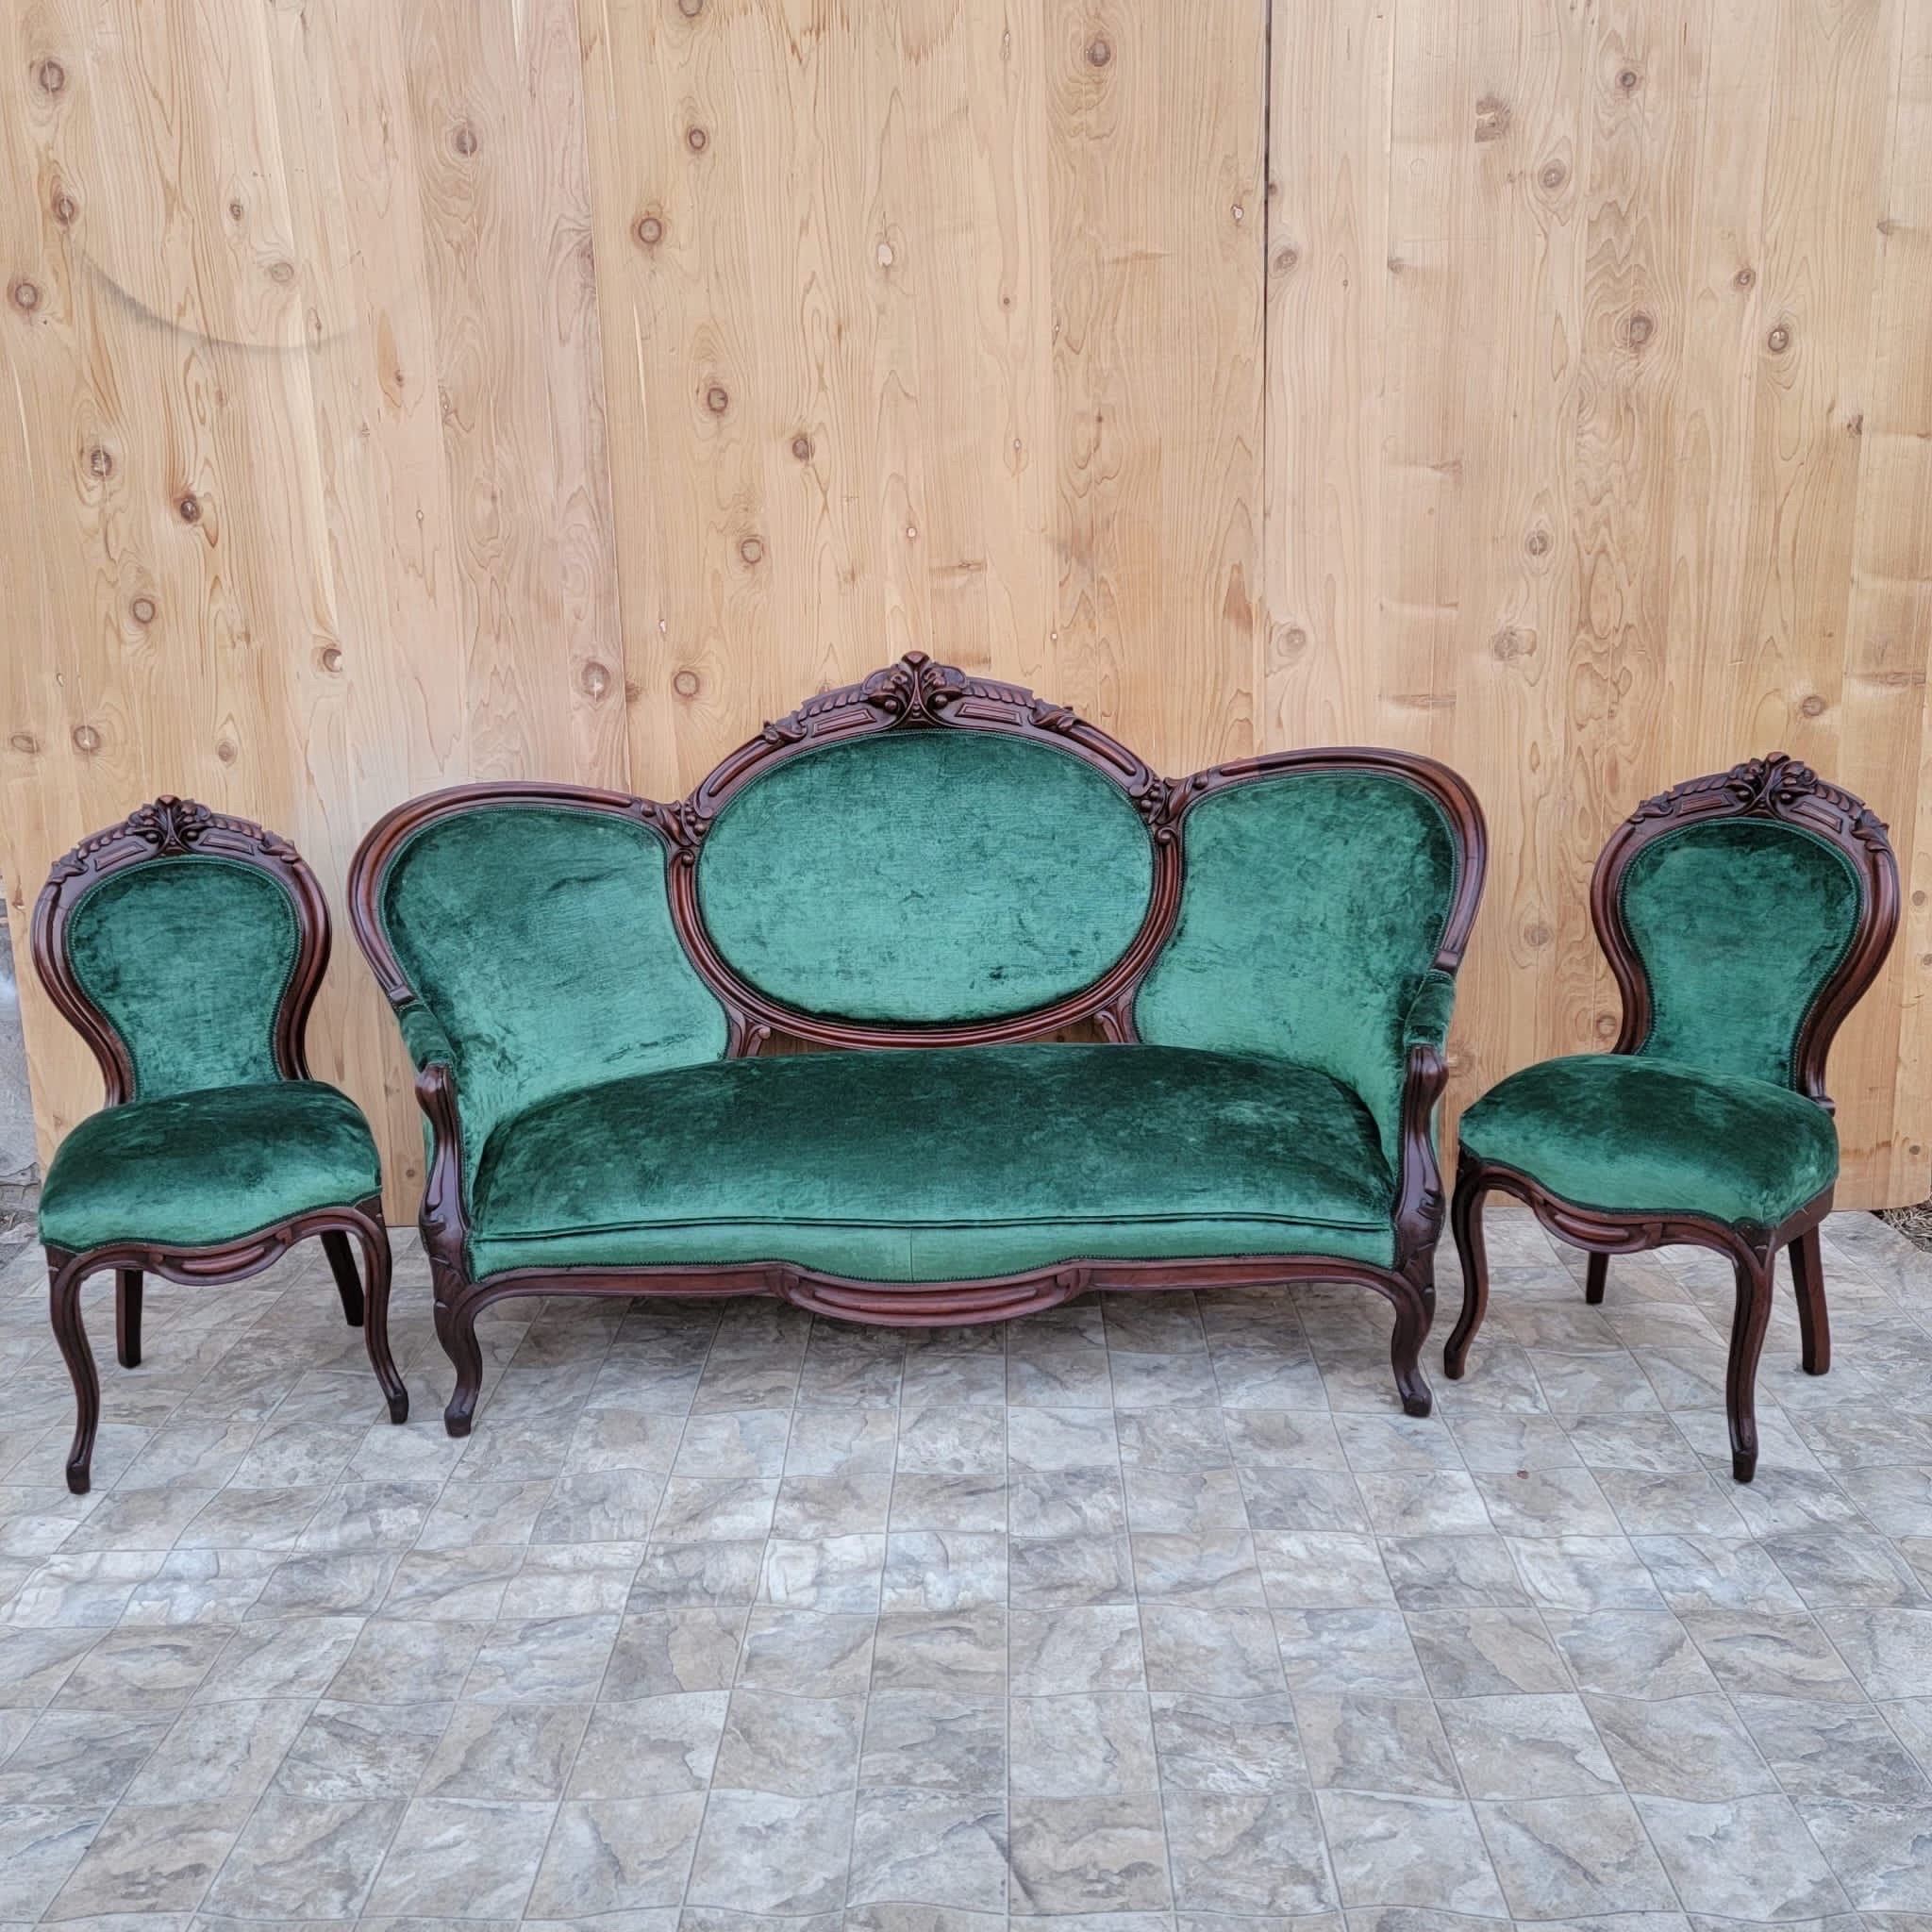 Antique Victorian carved medallion back sofa with 2 side chairs newly upholstered in a plush 